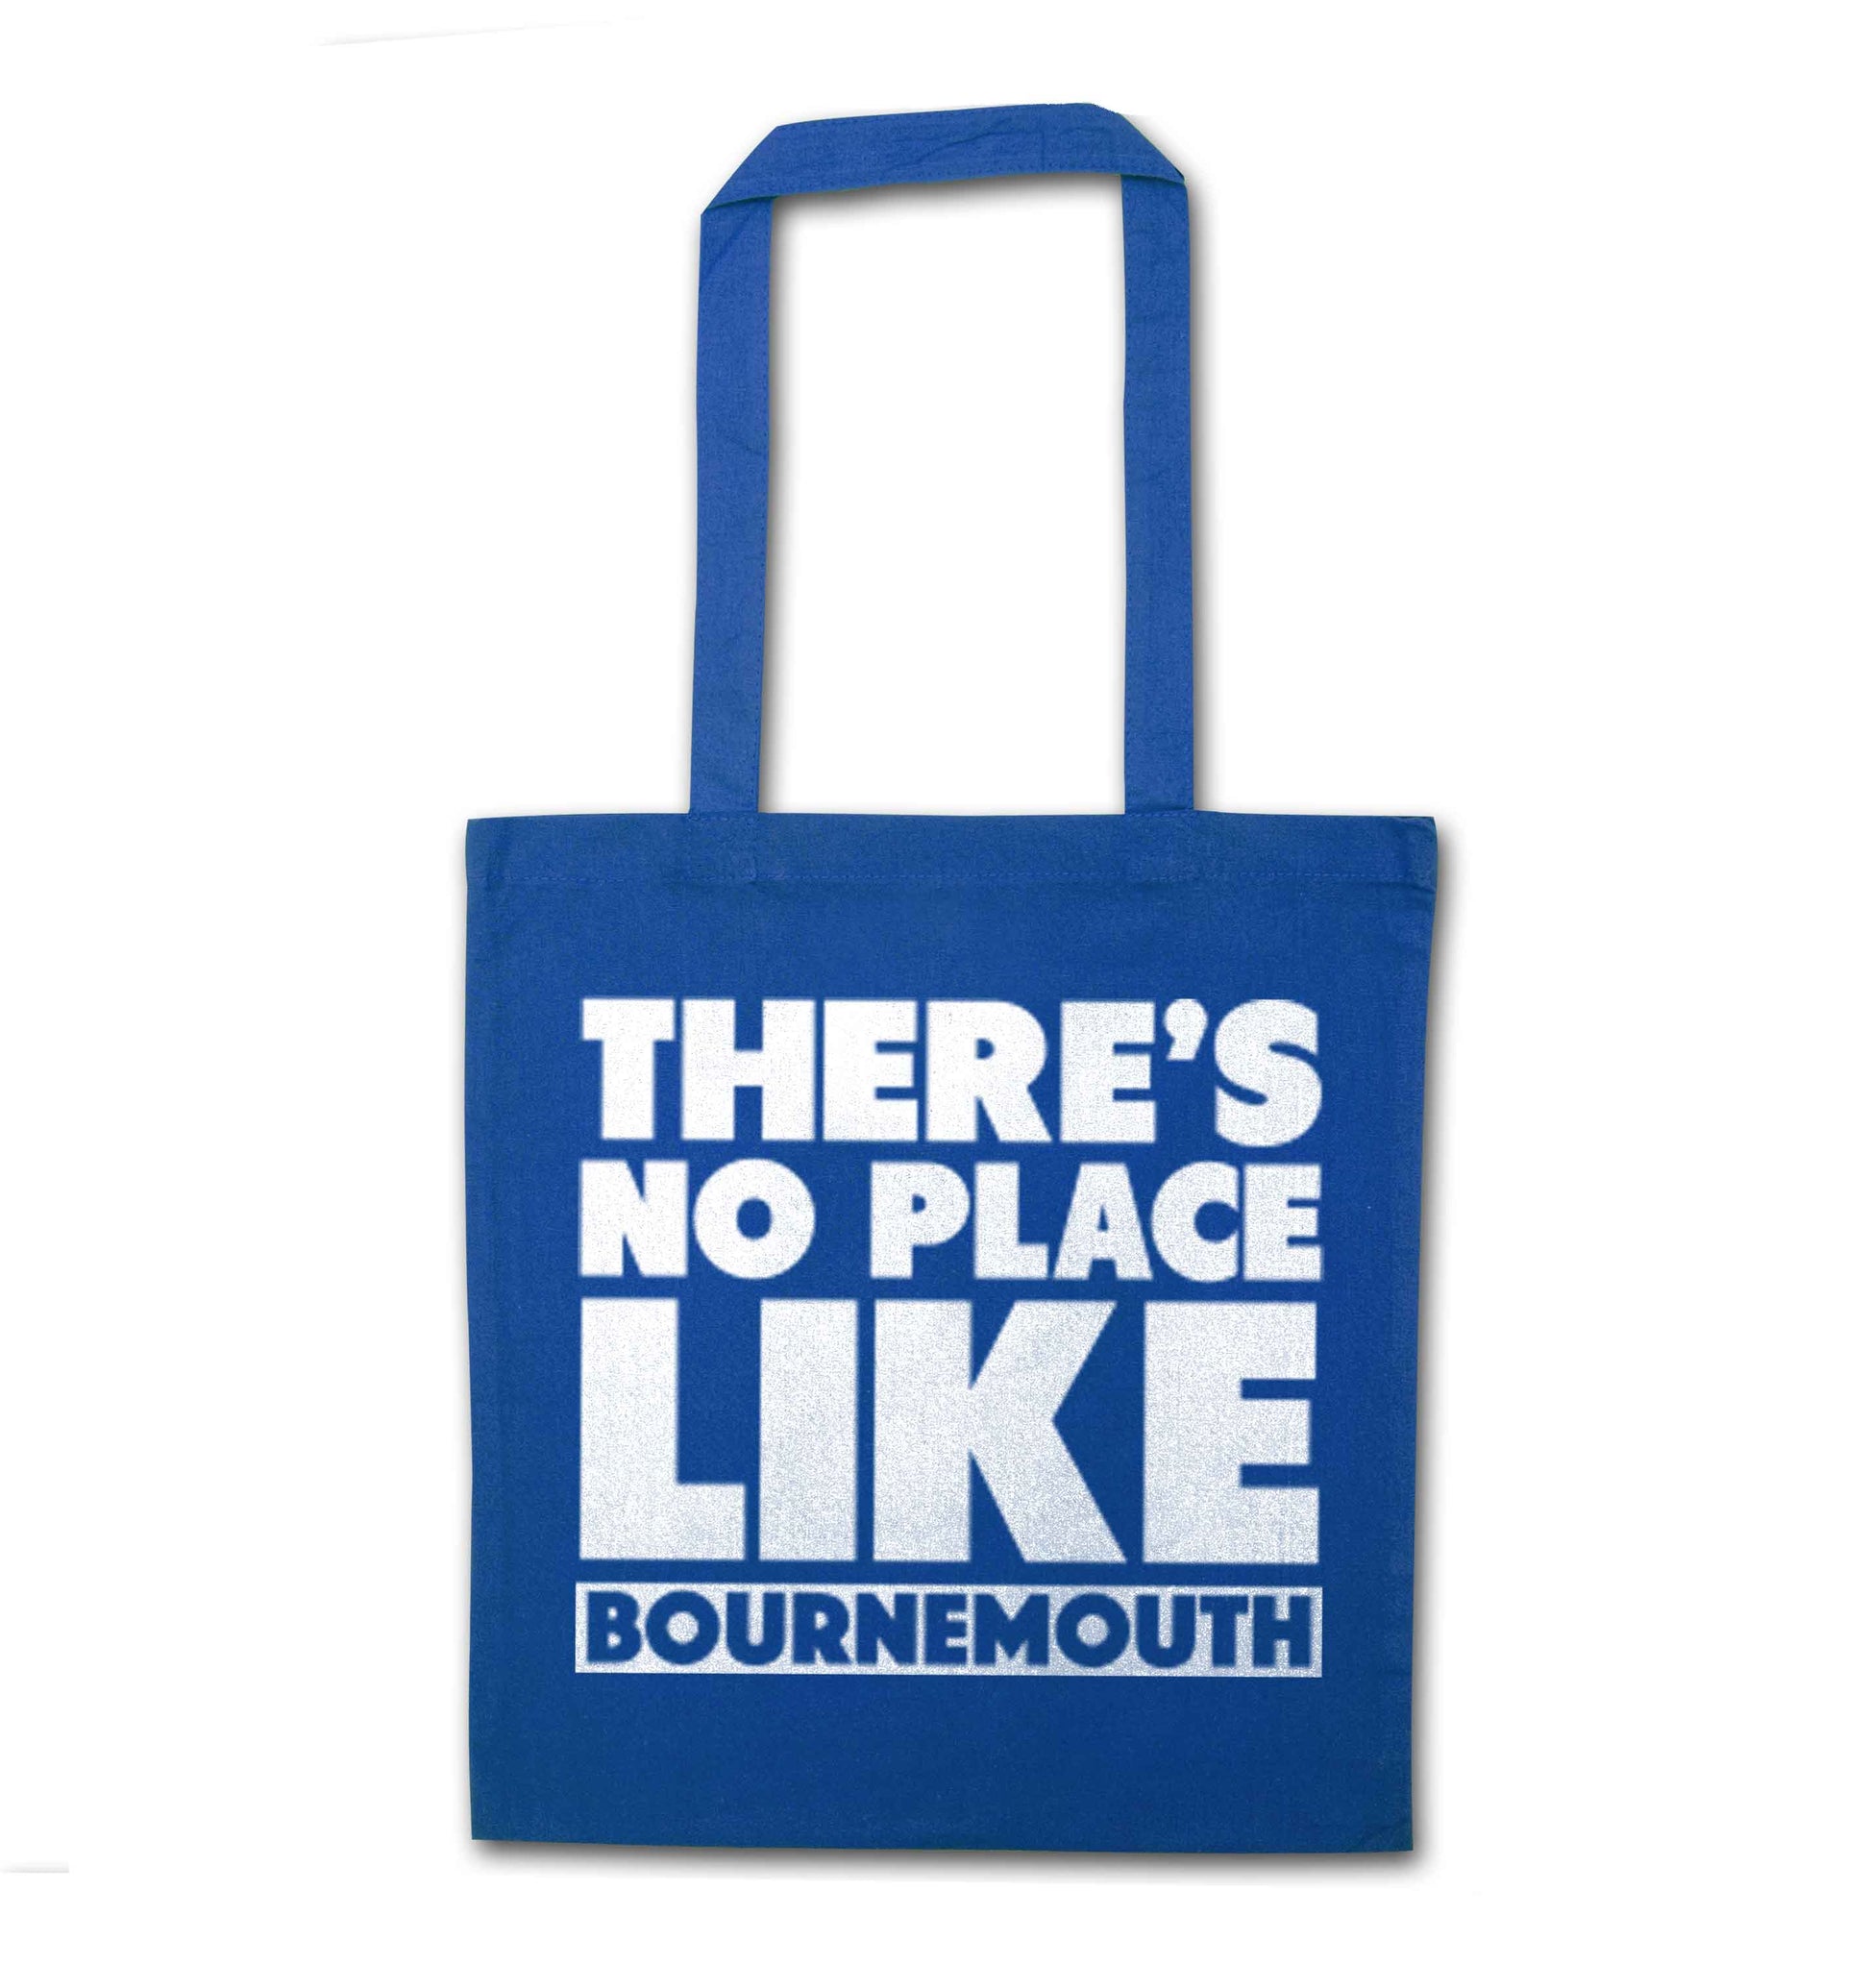 There's no place like Bournemouth blue tote bag